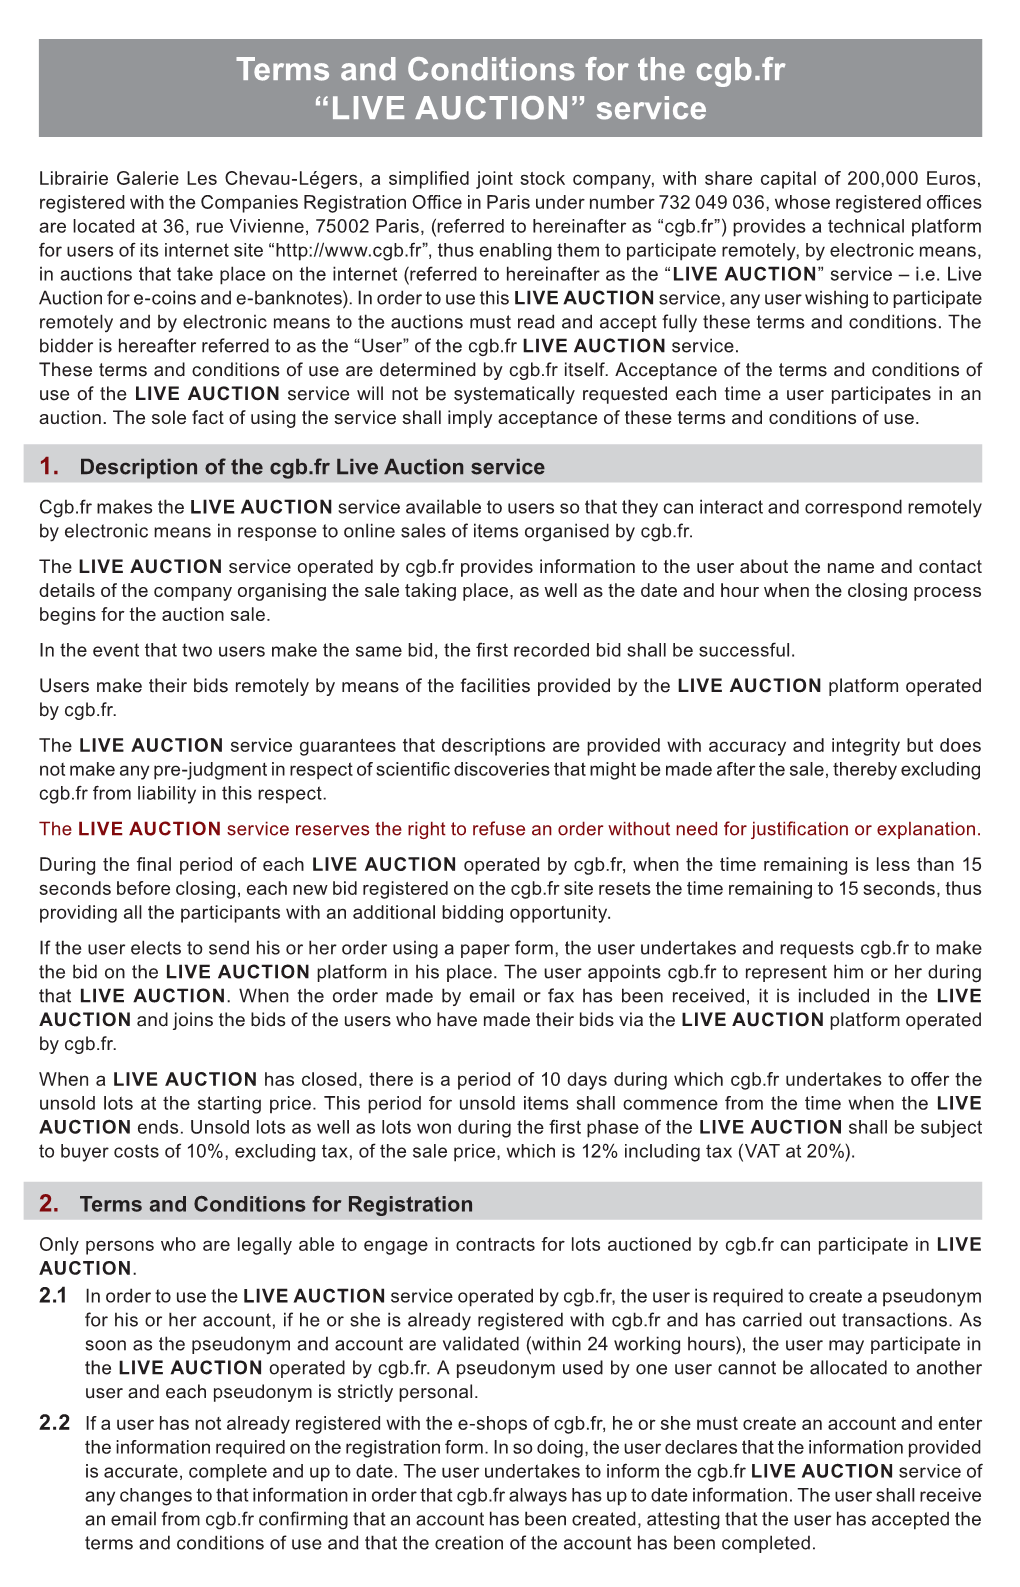 Terms and Conditions for the Cgb.Fr “LIVE AUCTION” Service